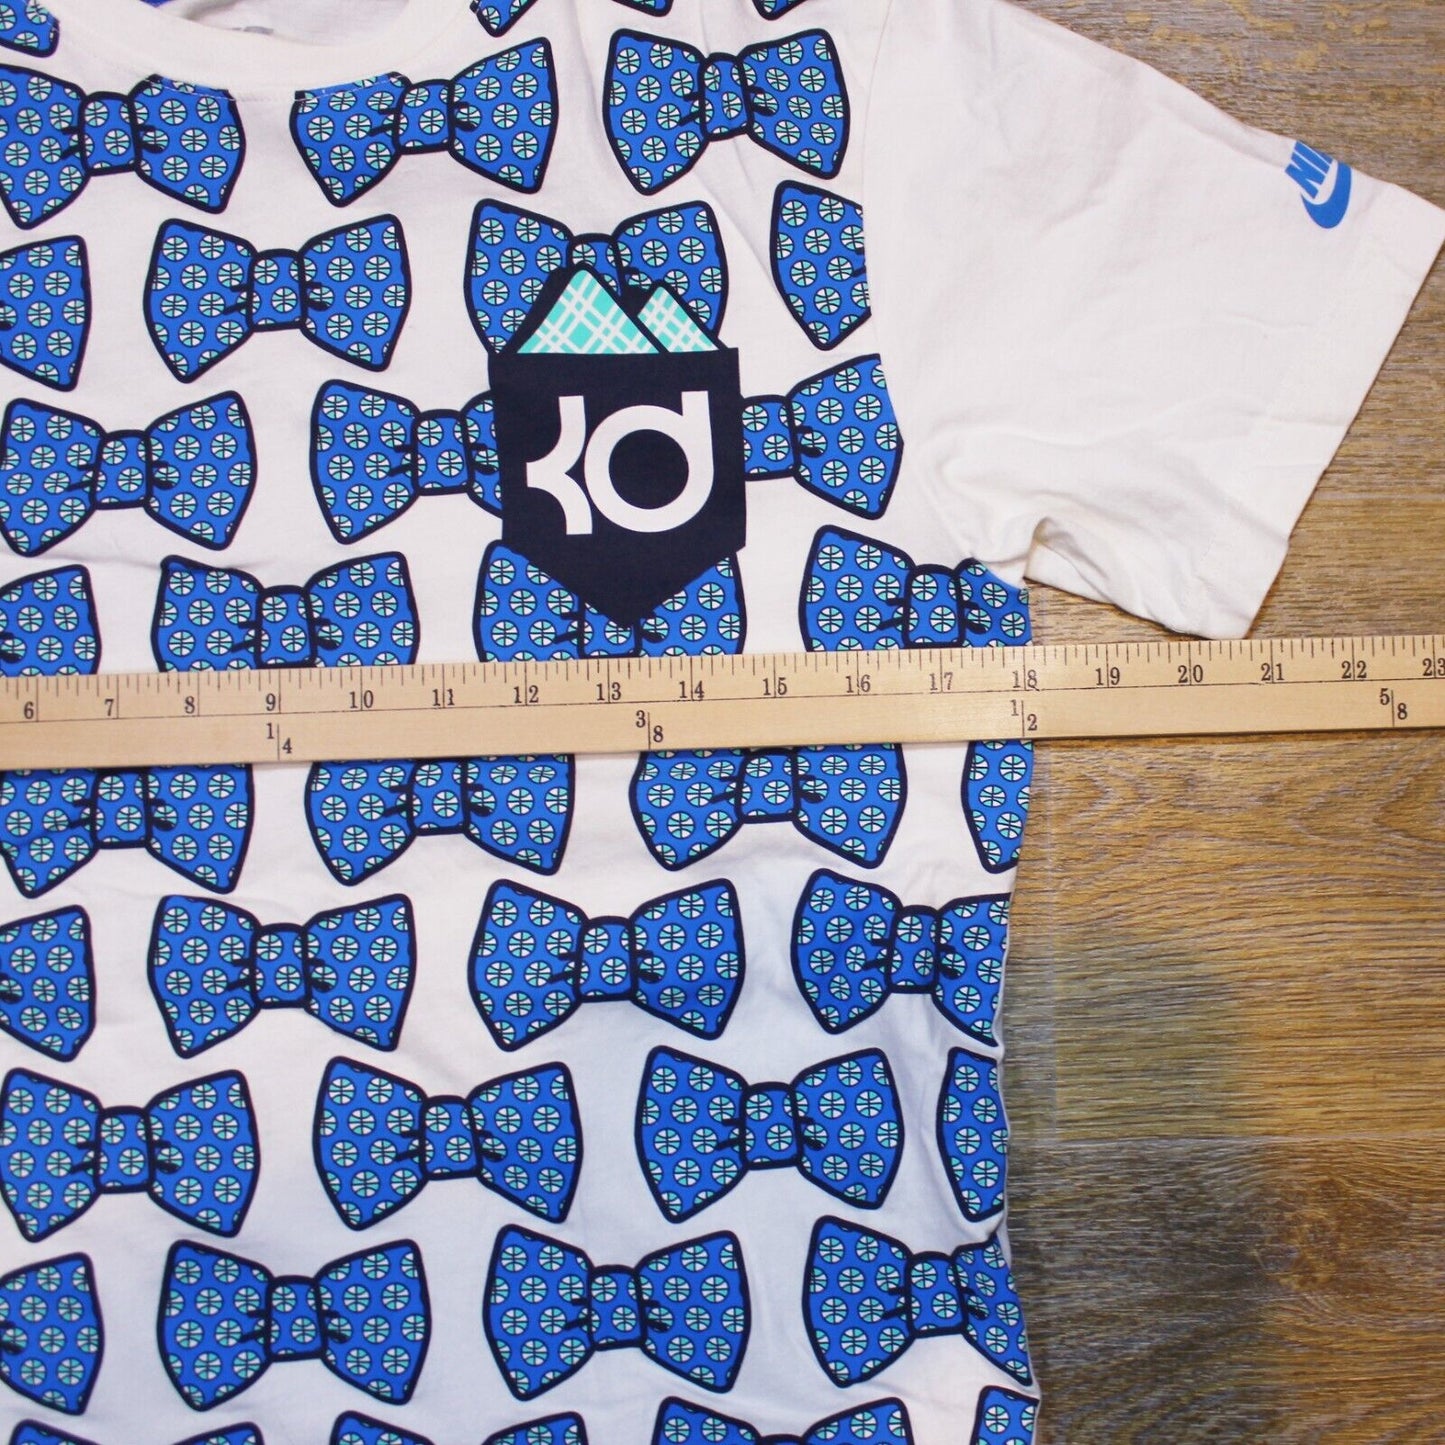 Nike Kevin Durant KD Nerd Bow Tie Blue/White Graphic T-Shirt -  Men's Size Small